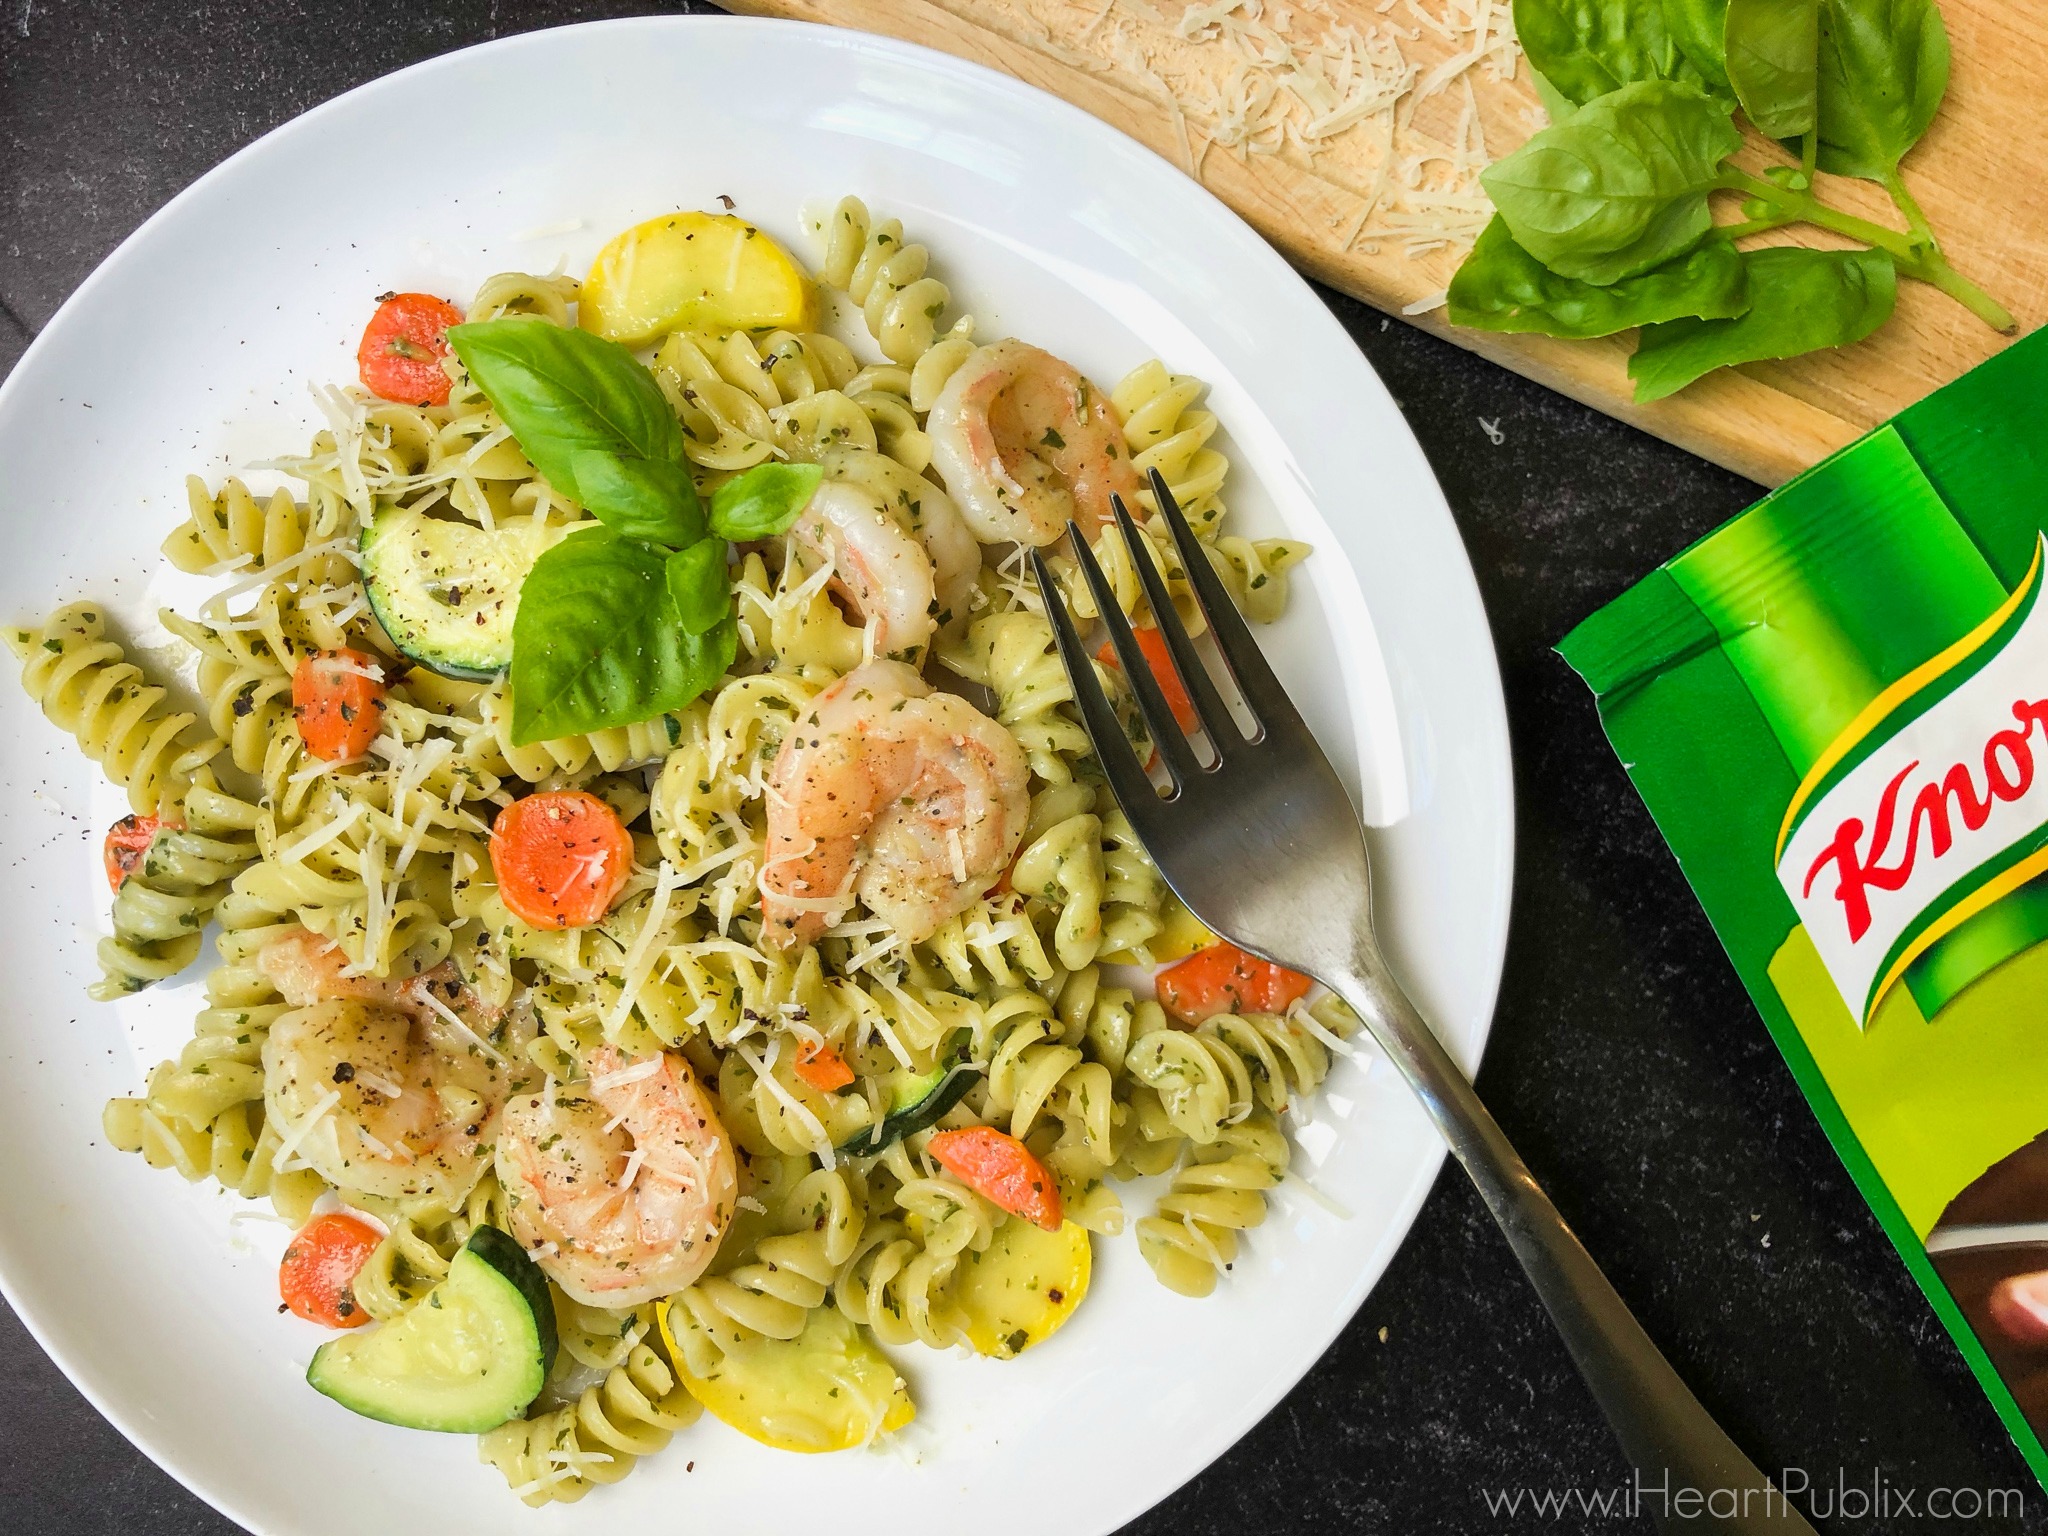 Save On Knorr Products At Publix - Enjoy Feel-Good Flavors Made Easy! on I Heart Publix 1